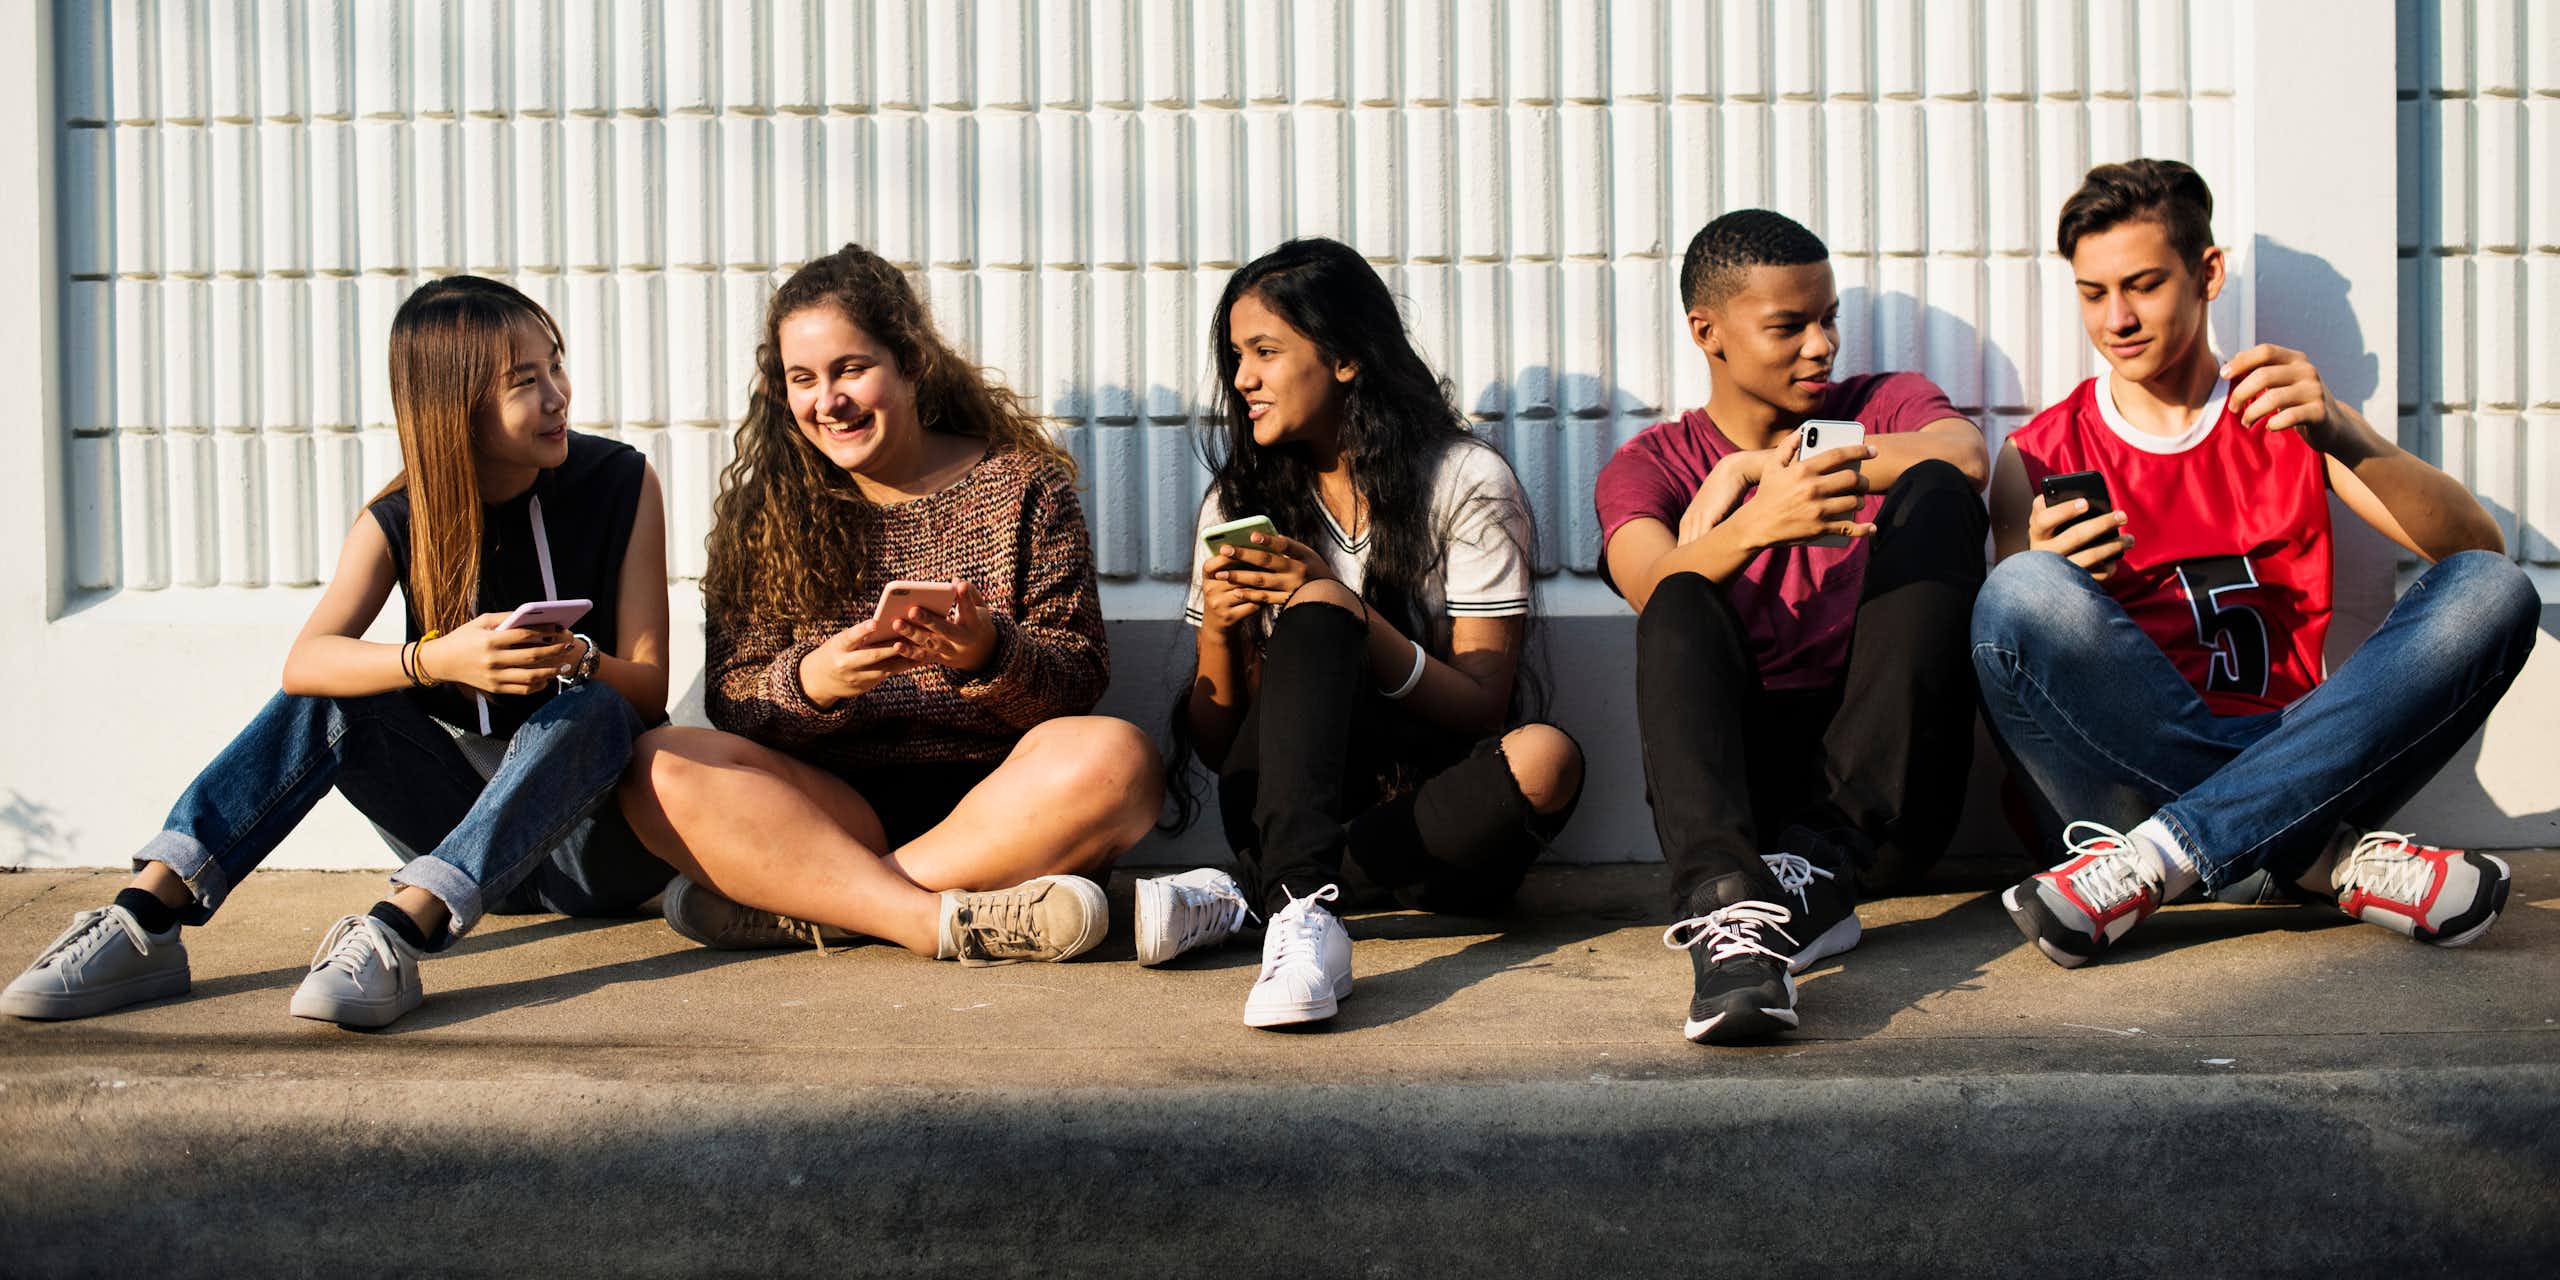 Five diverse teens sitting on the ground socialising over smartphones.